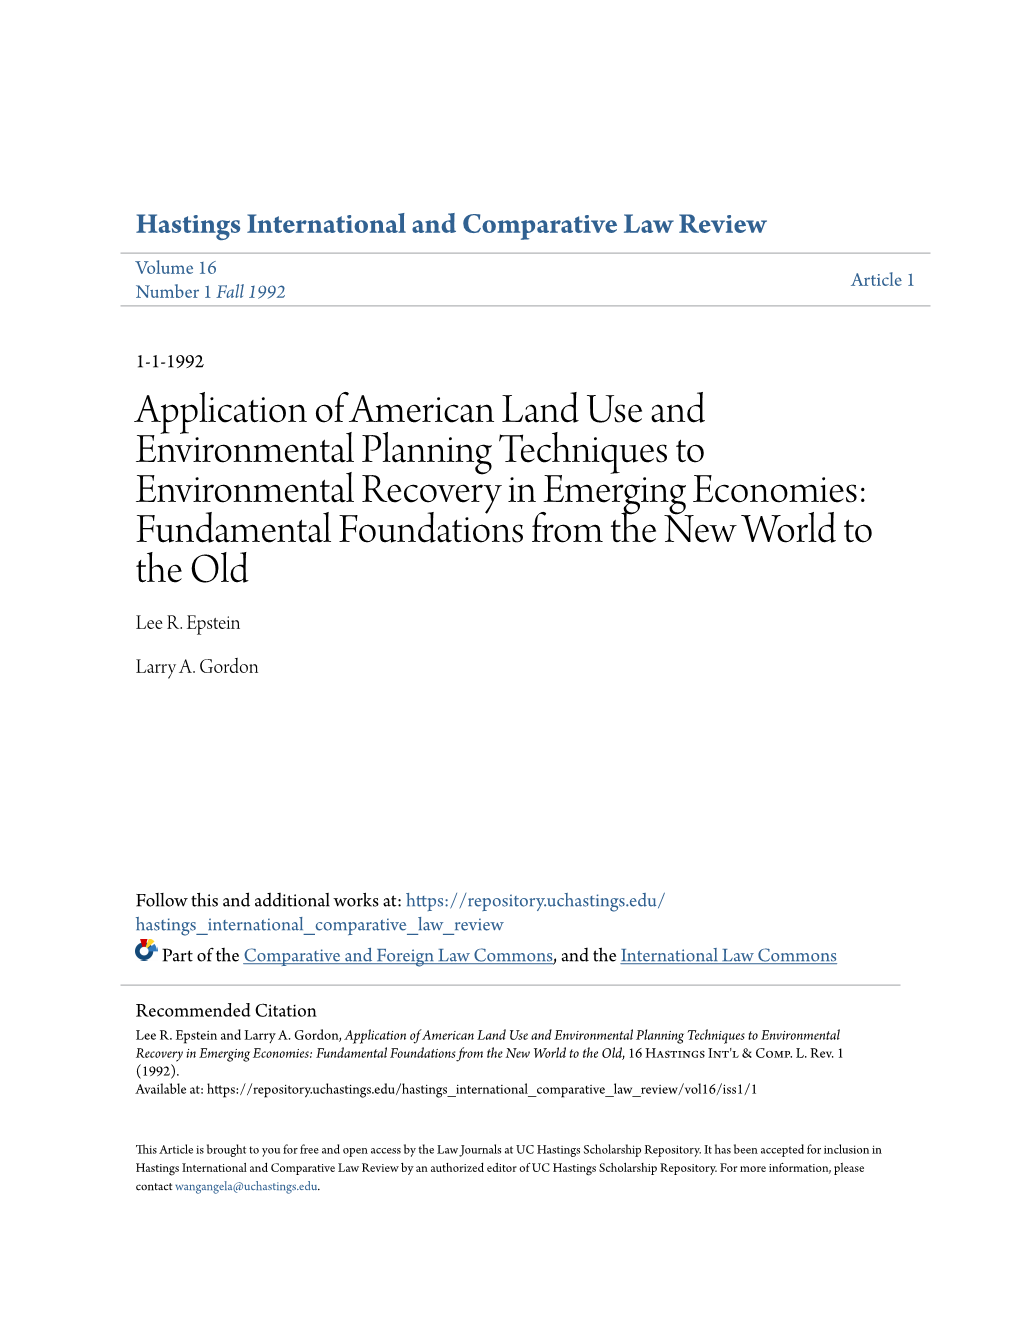 Application of American Land Use and Environmental Planning